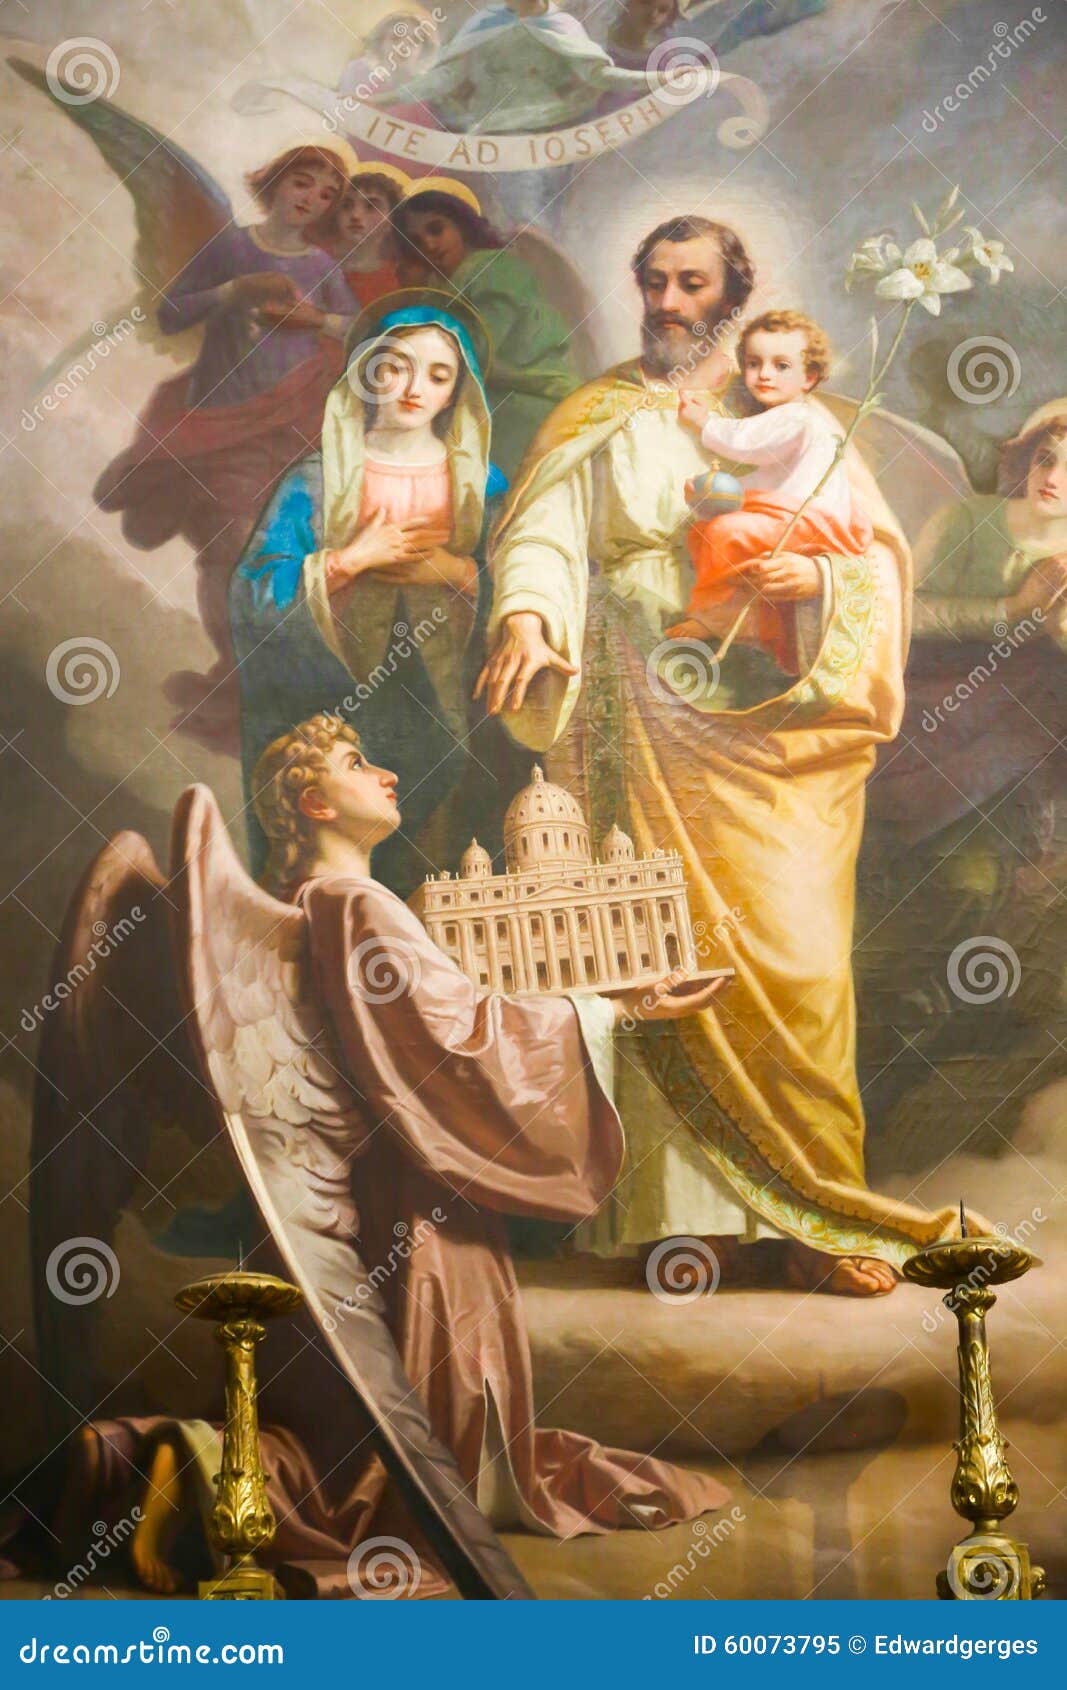 The Holy Family - Painting at Basilica, Rome Editorial Image ...